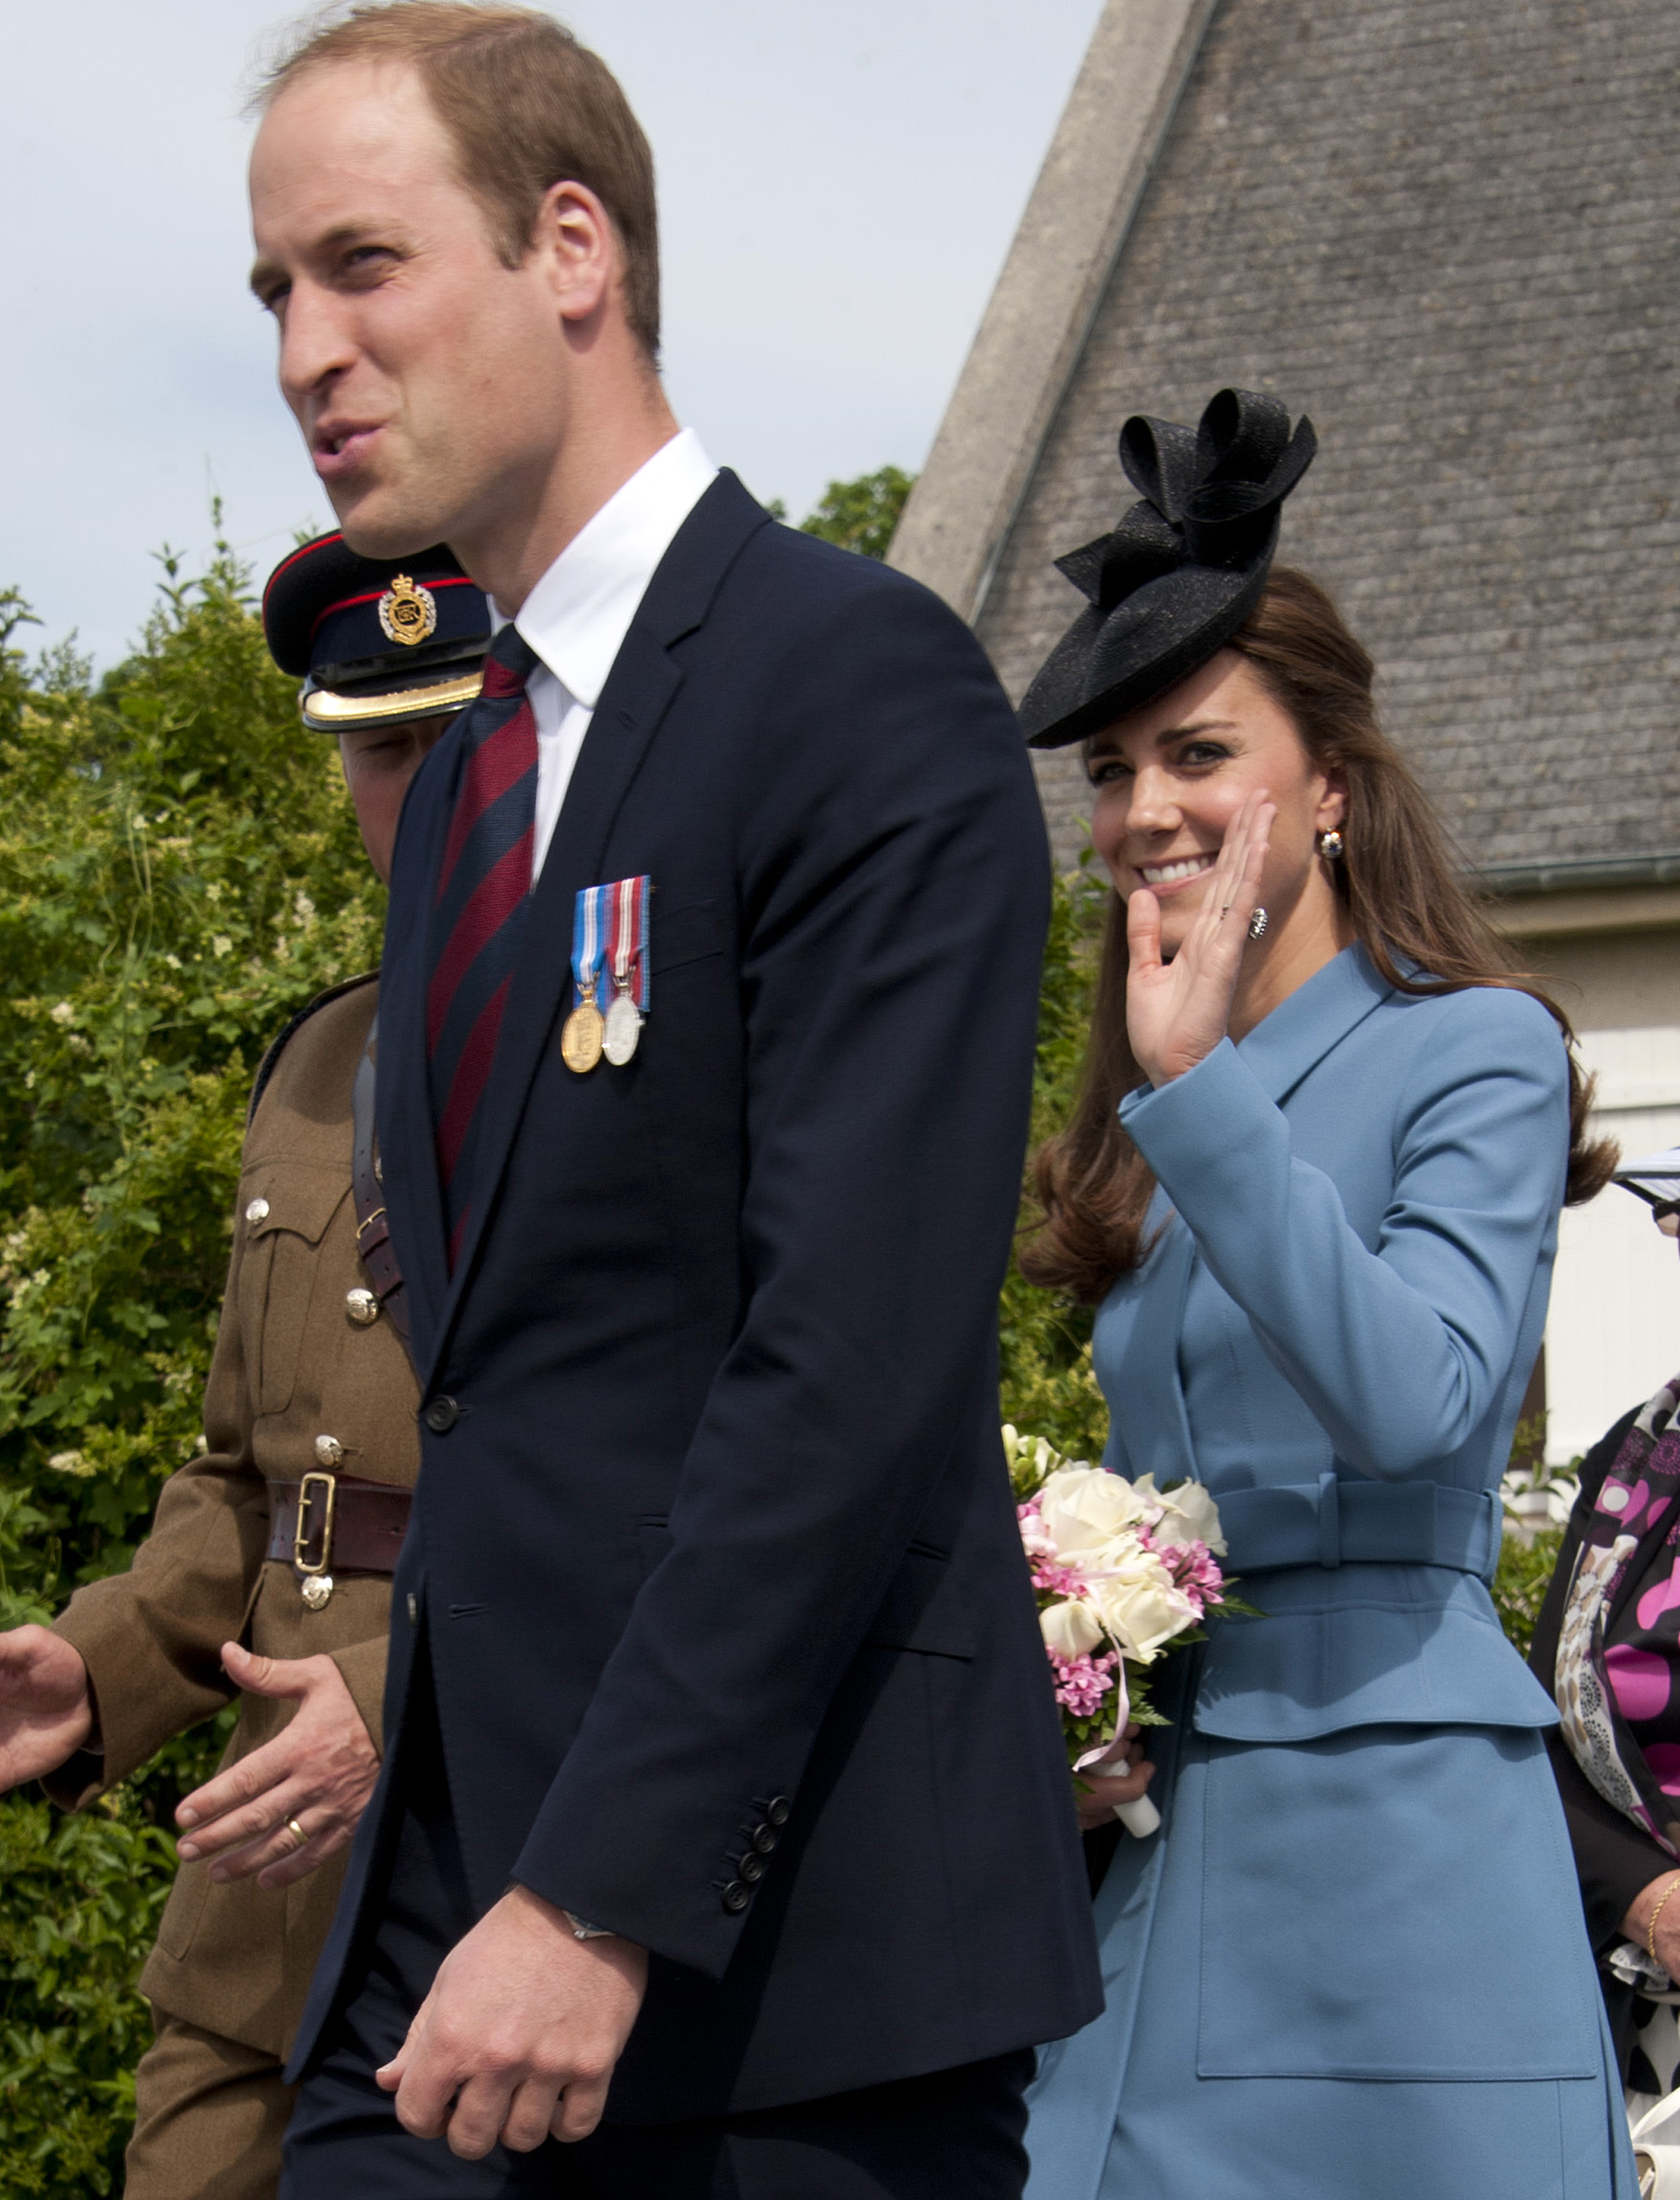 Well Replayed, Wills and Kate at the D-Day Anniversary Events